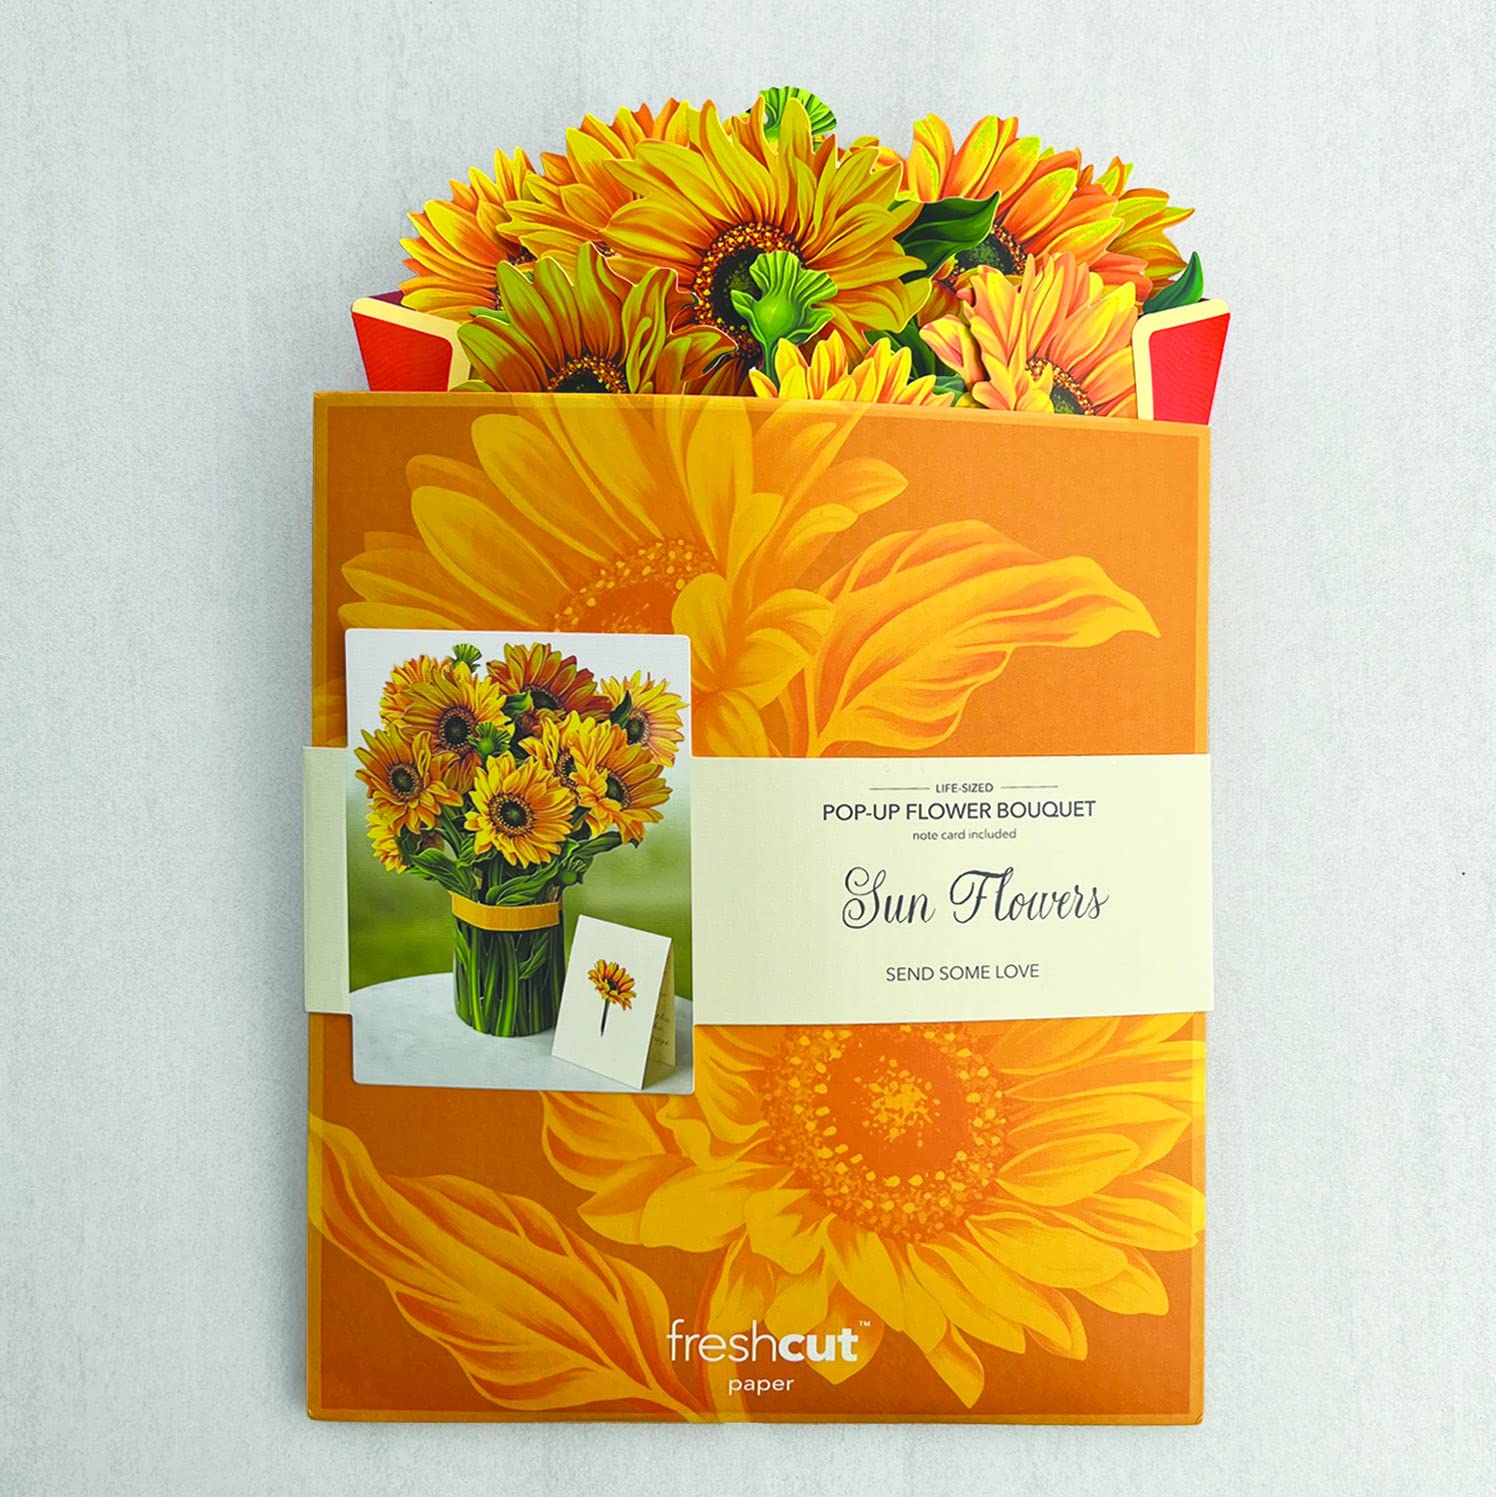 Freshcut Paper Pop Up Cards, Sunflowers, 12 inch Life Sized Forever Flower Bouquet 3D Popup Greeting Cards with Note Card and Envelope